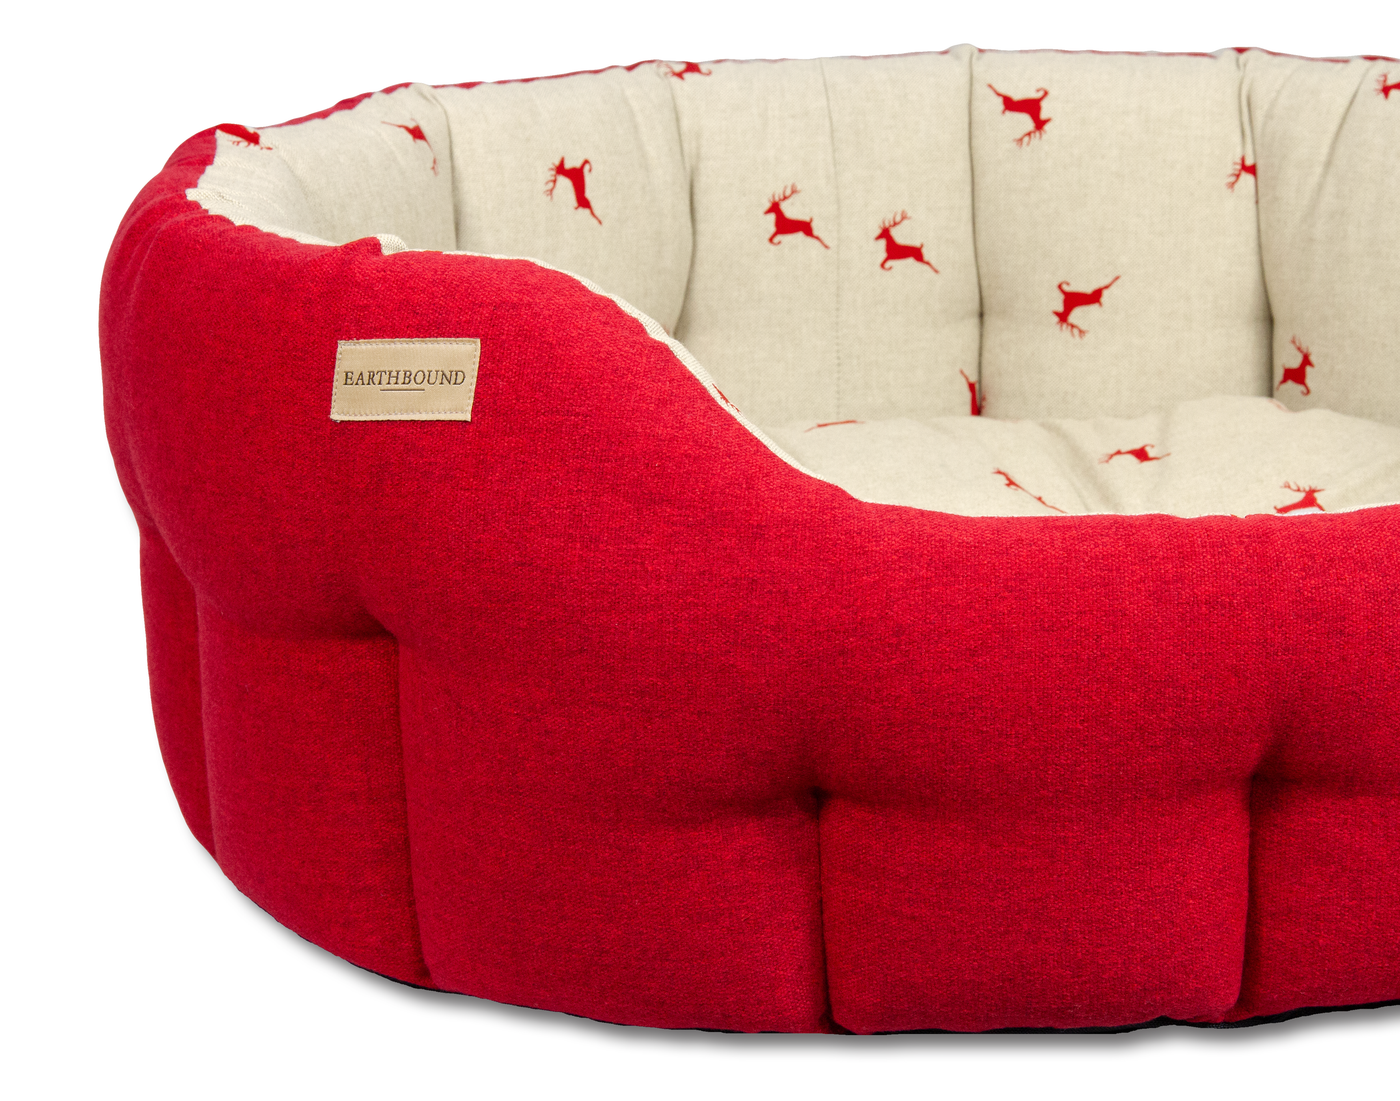 Classic Brushed Stag Bed Red